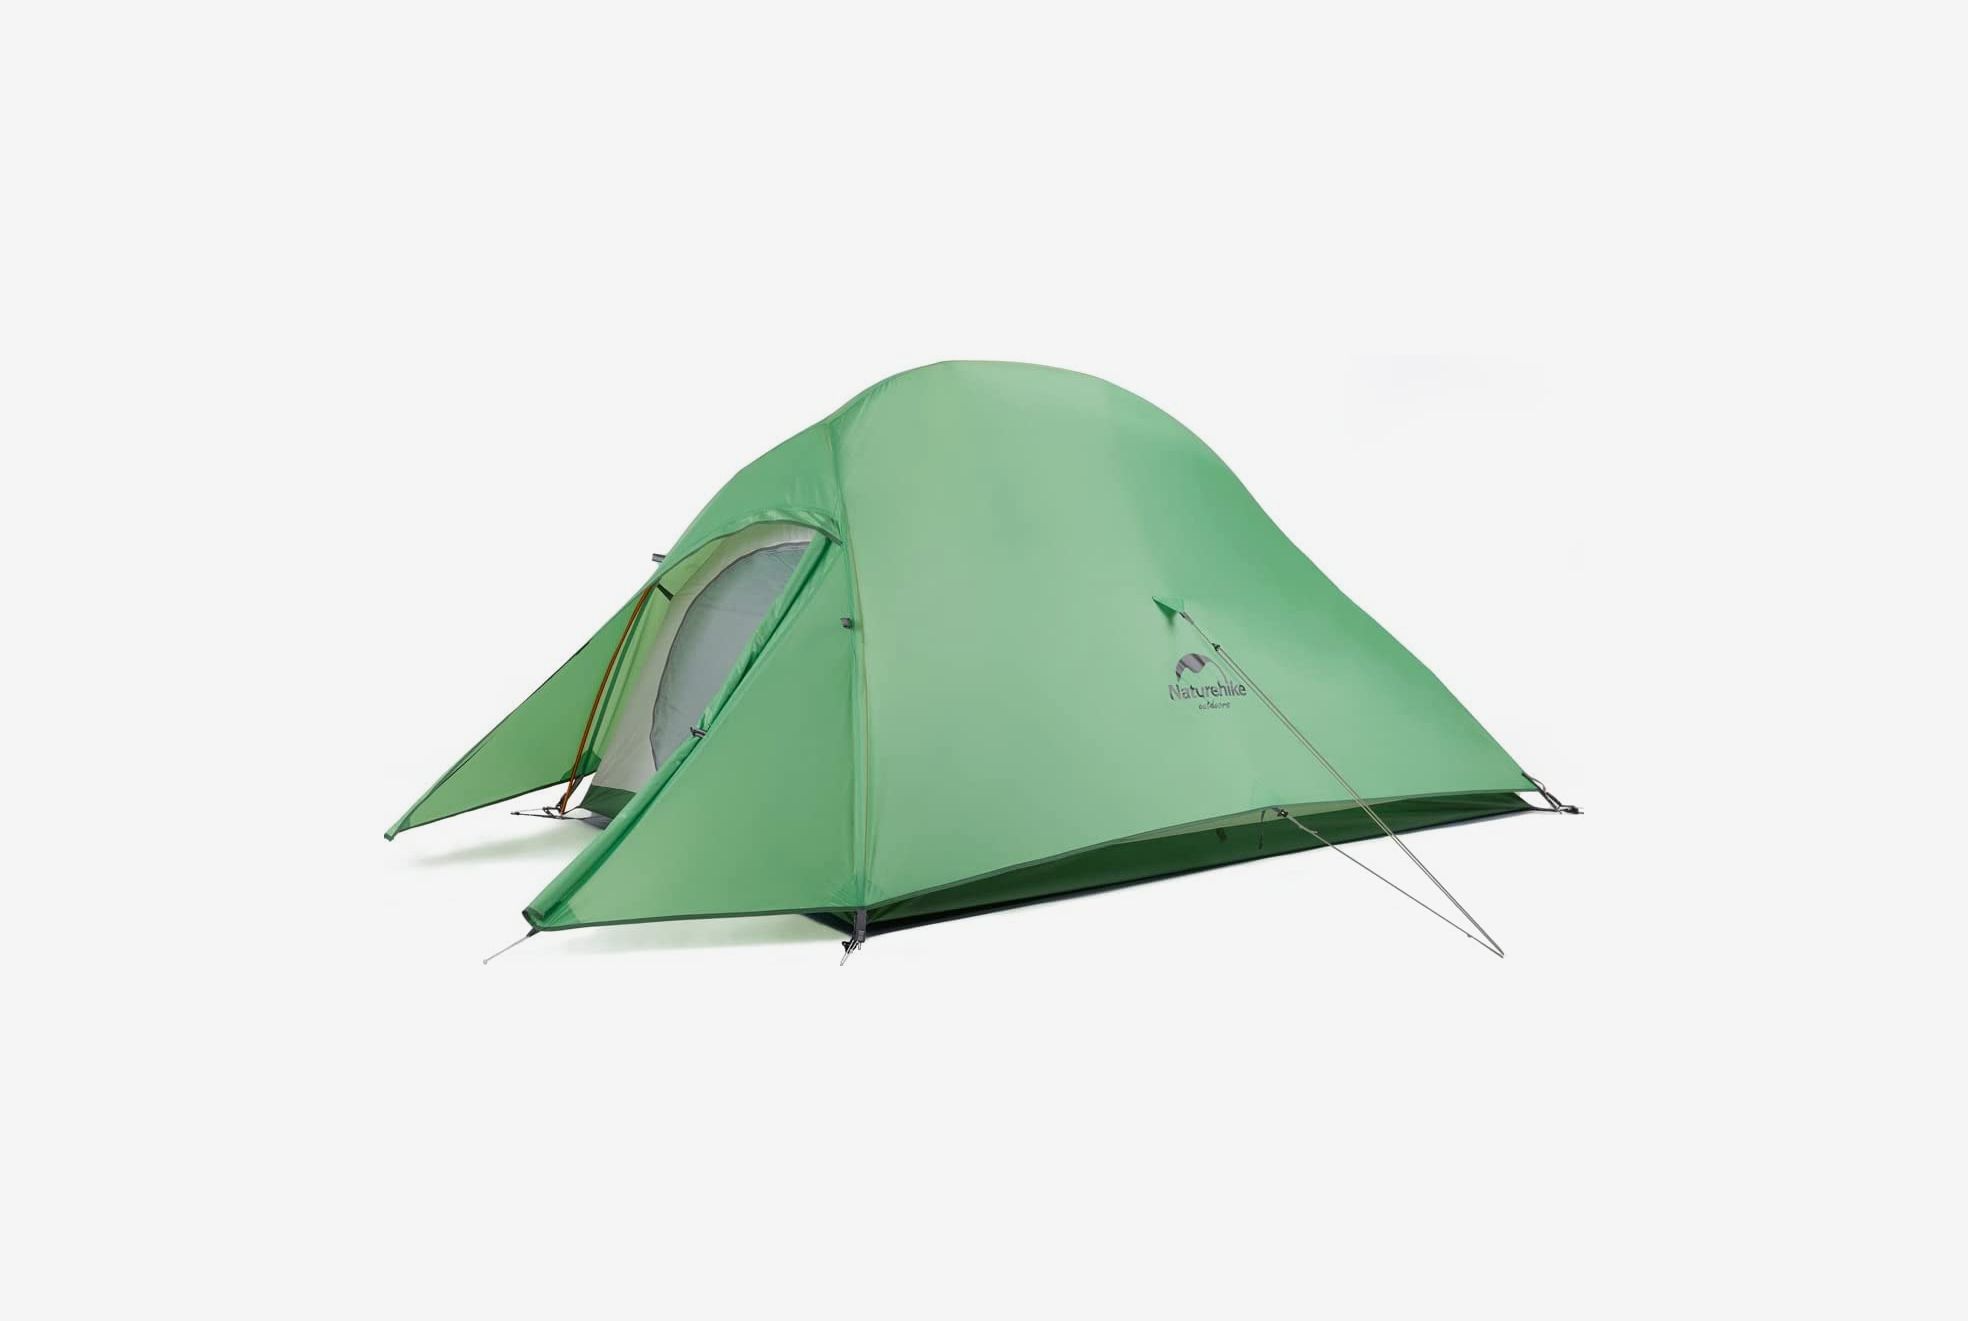 14 Best Outdoor Tents for Camping and Backpacking — 2021 | The 